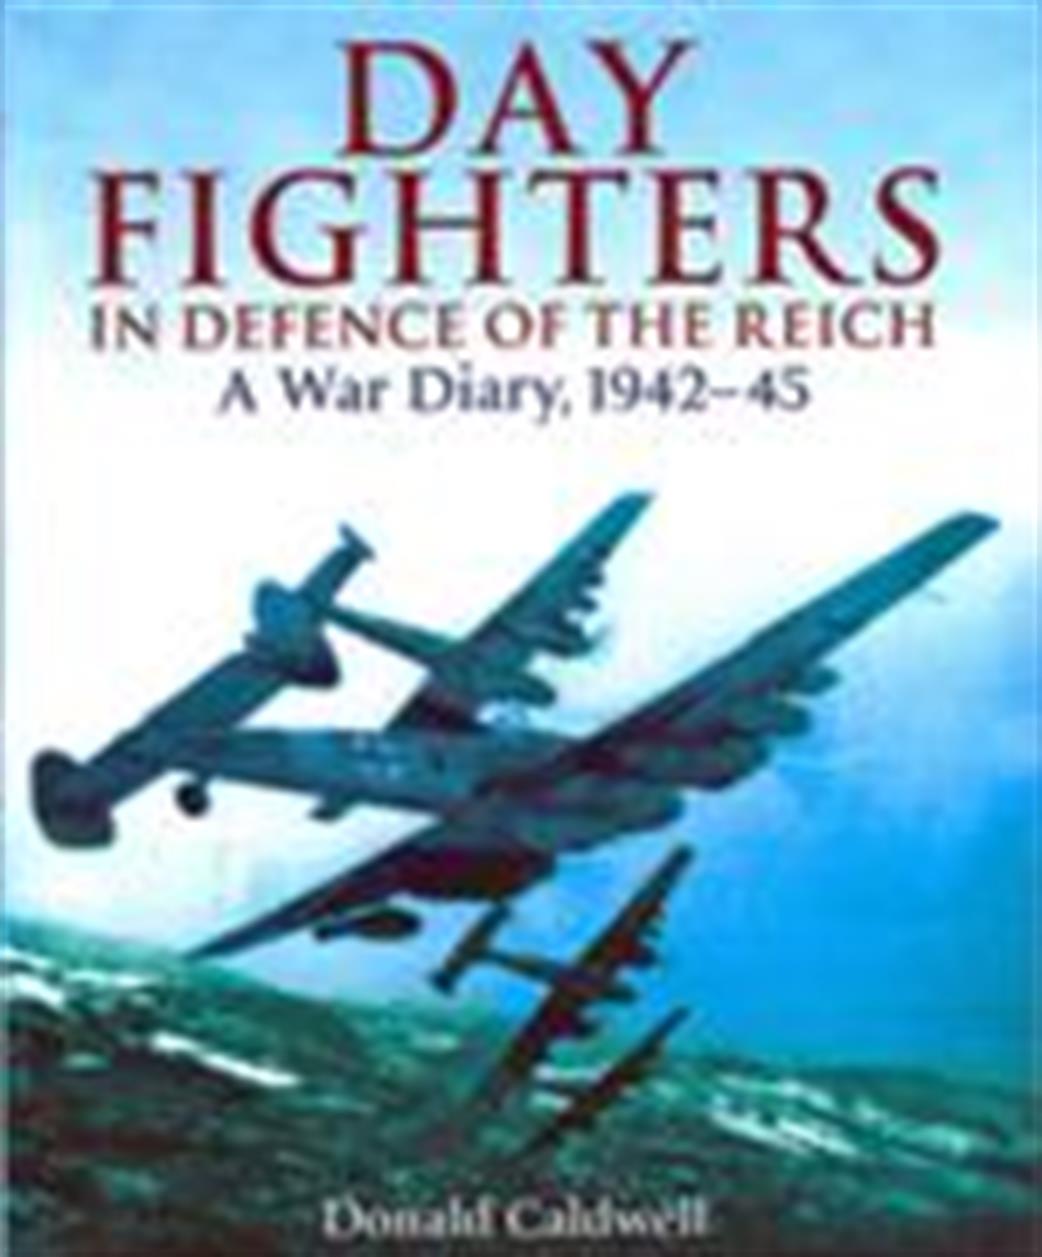 9781848325258 Day Fighter In Defence of the Reich by Donald Caldwell